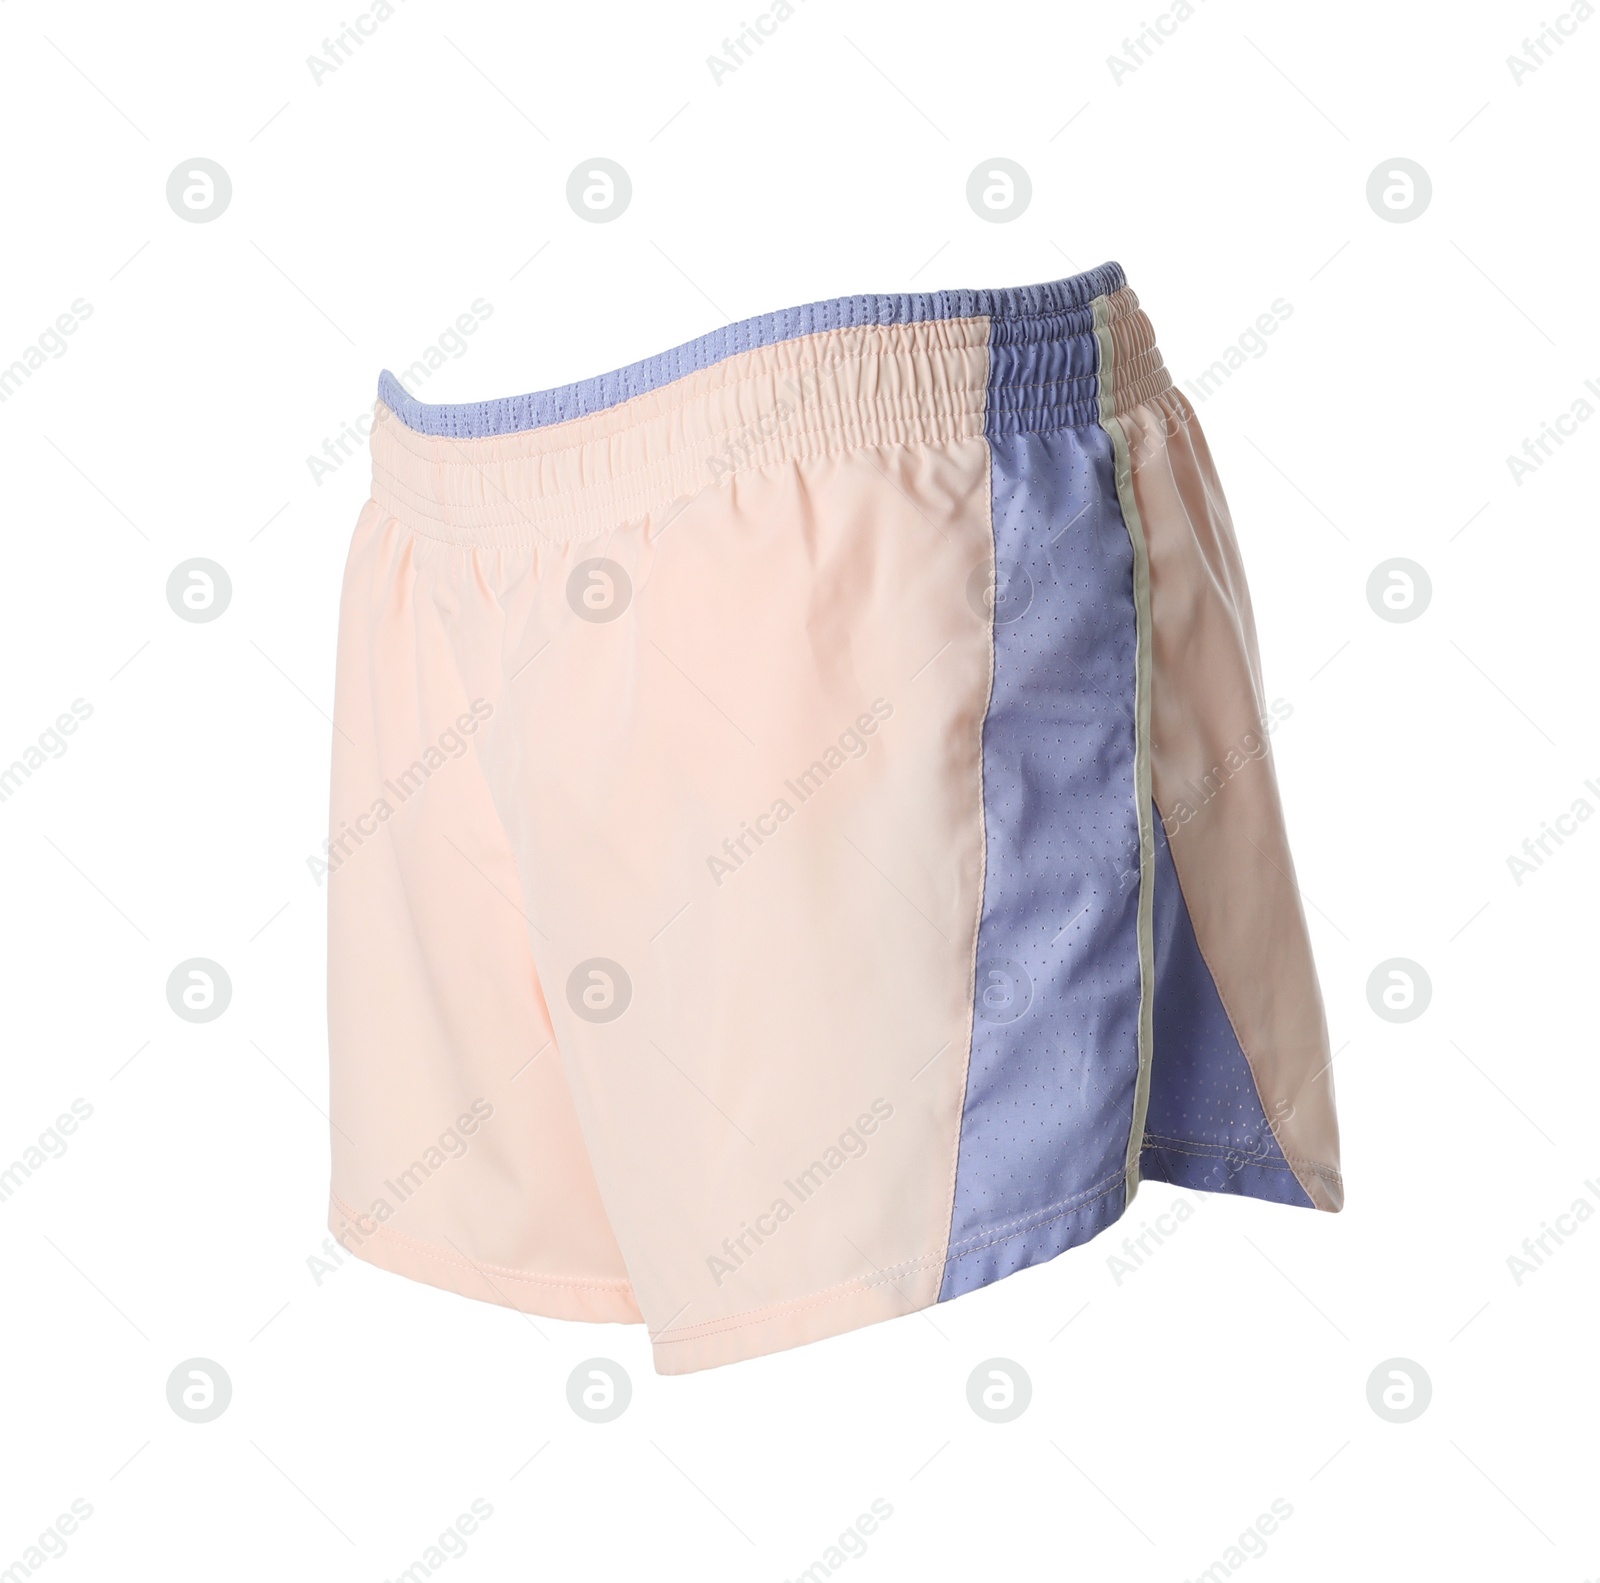 Photo of Color women's shorts isolated on white. Sports clothing